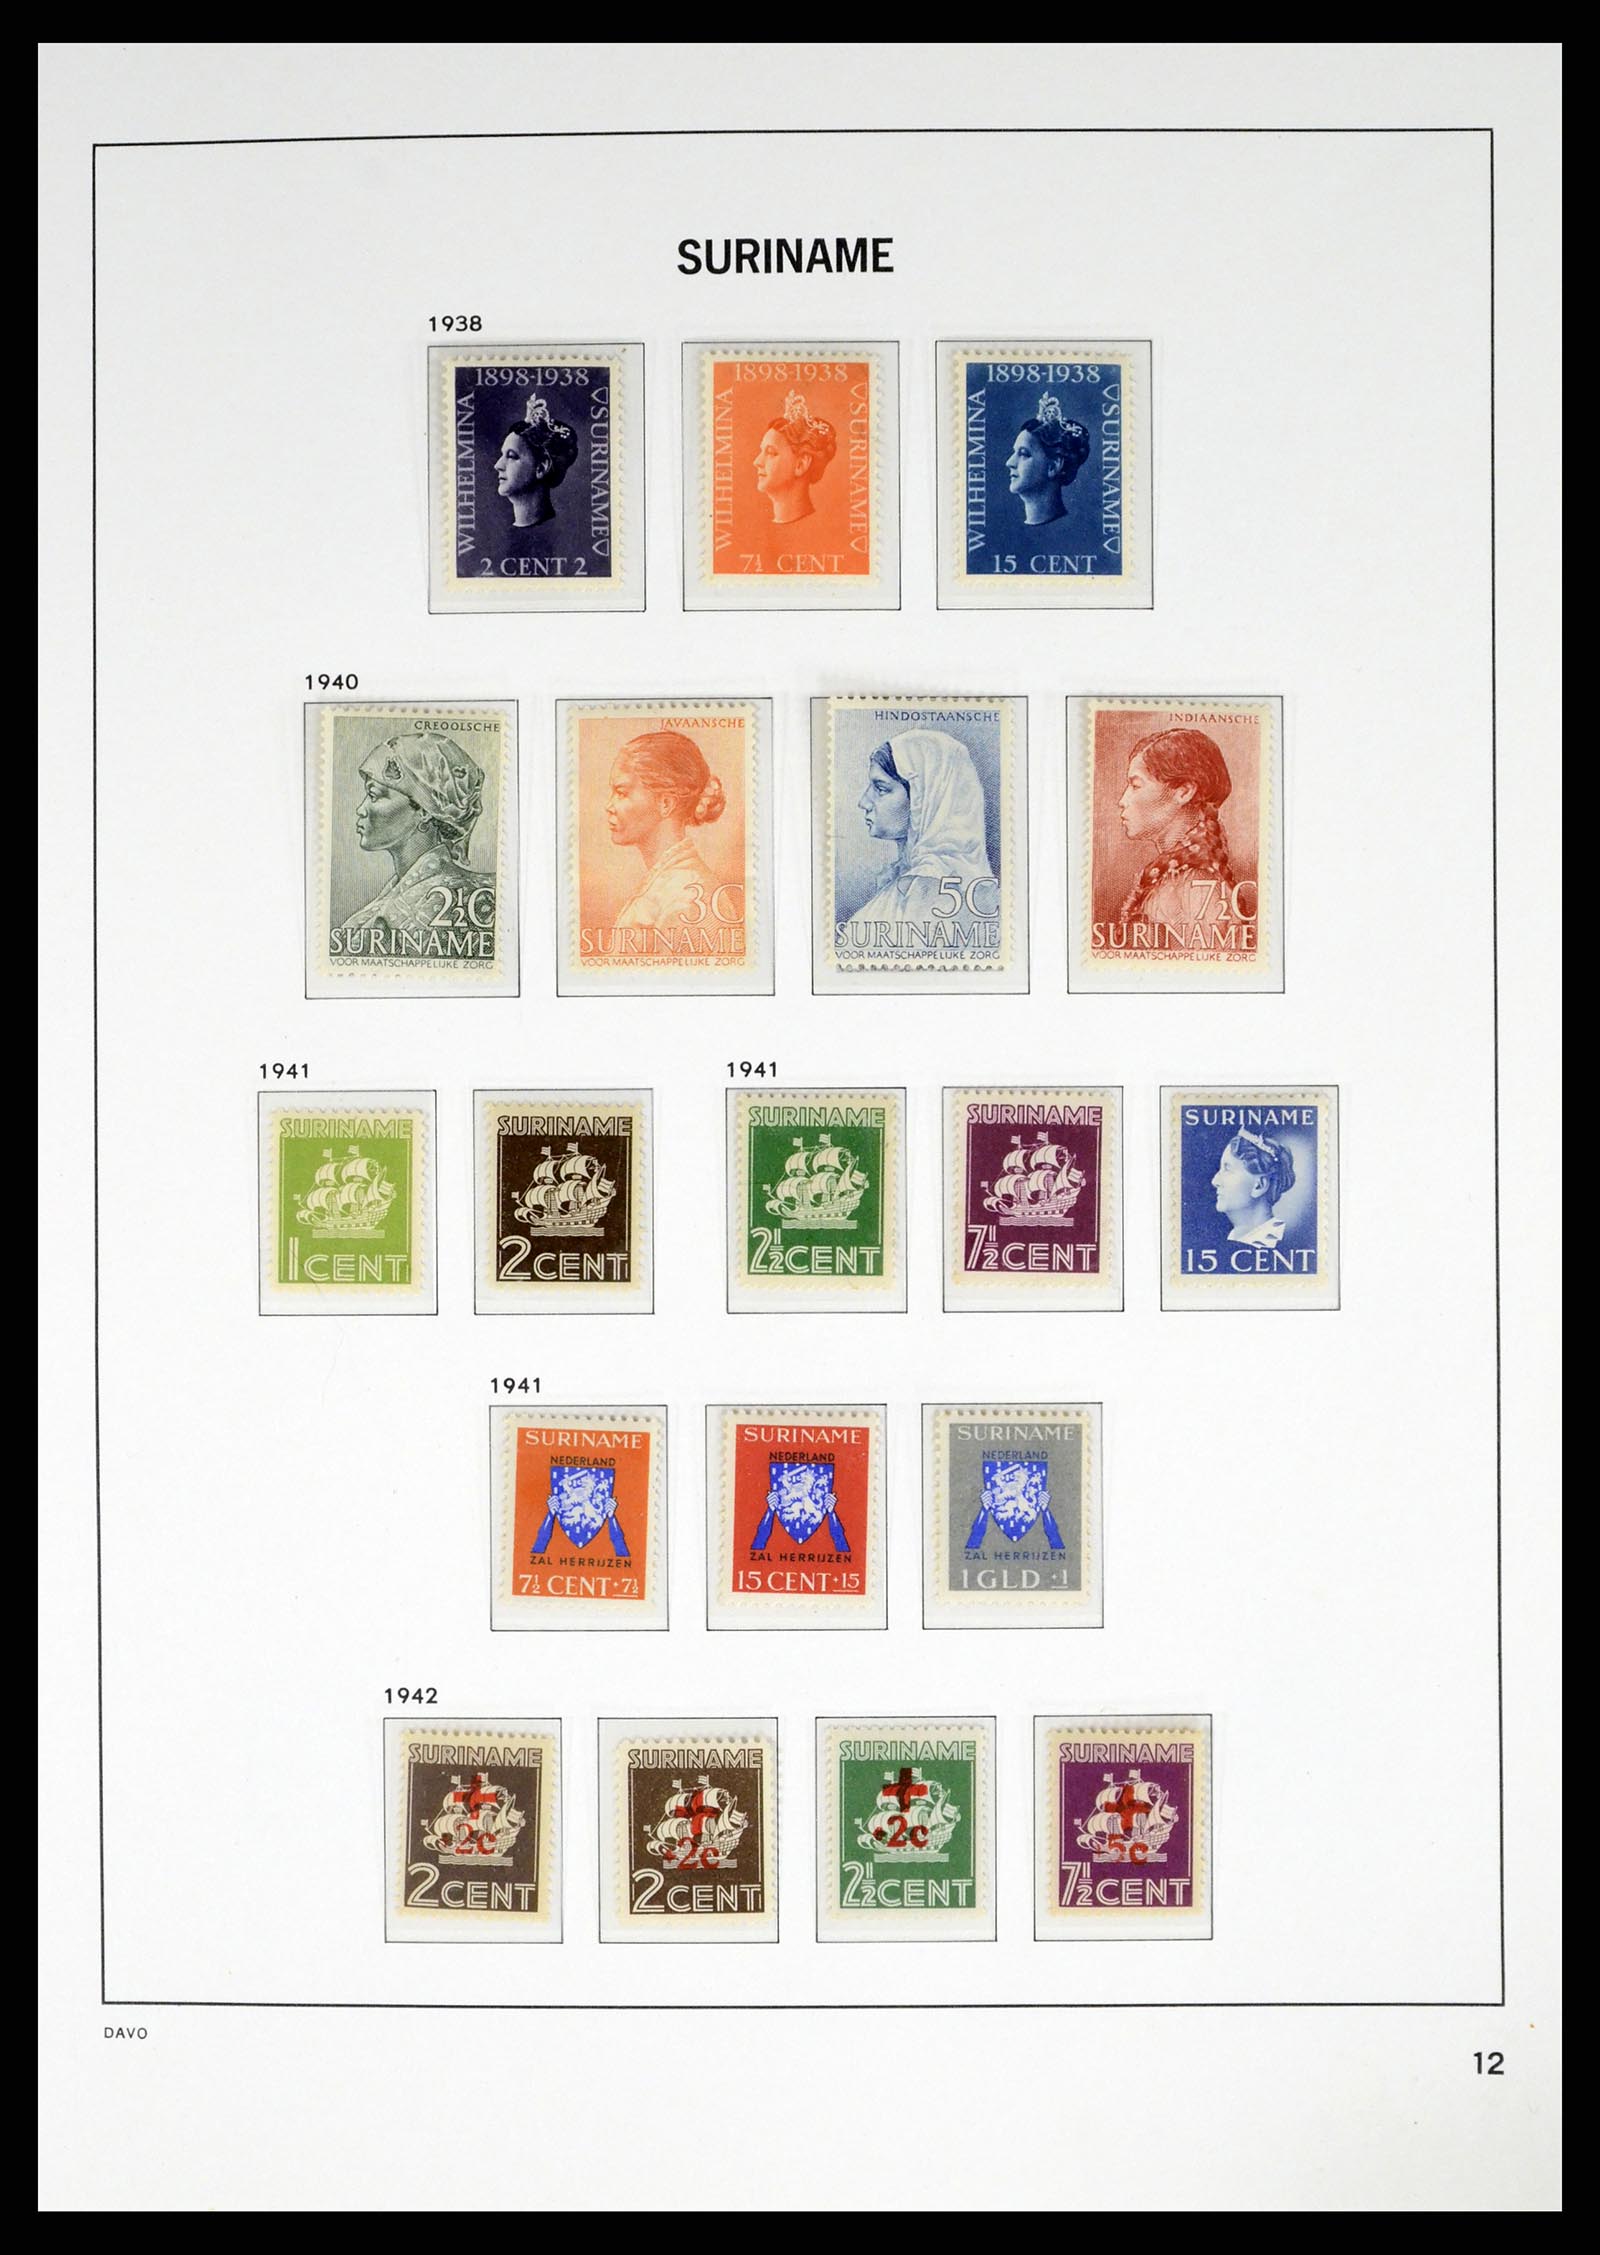 37421 012 - Stamp collection 37421 Suriname 1873-1975.